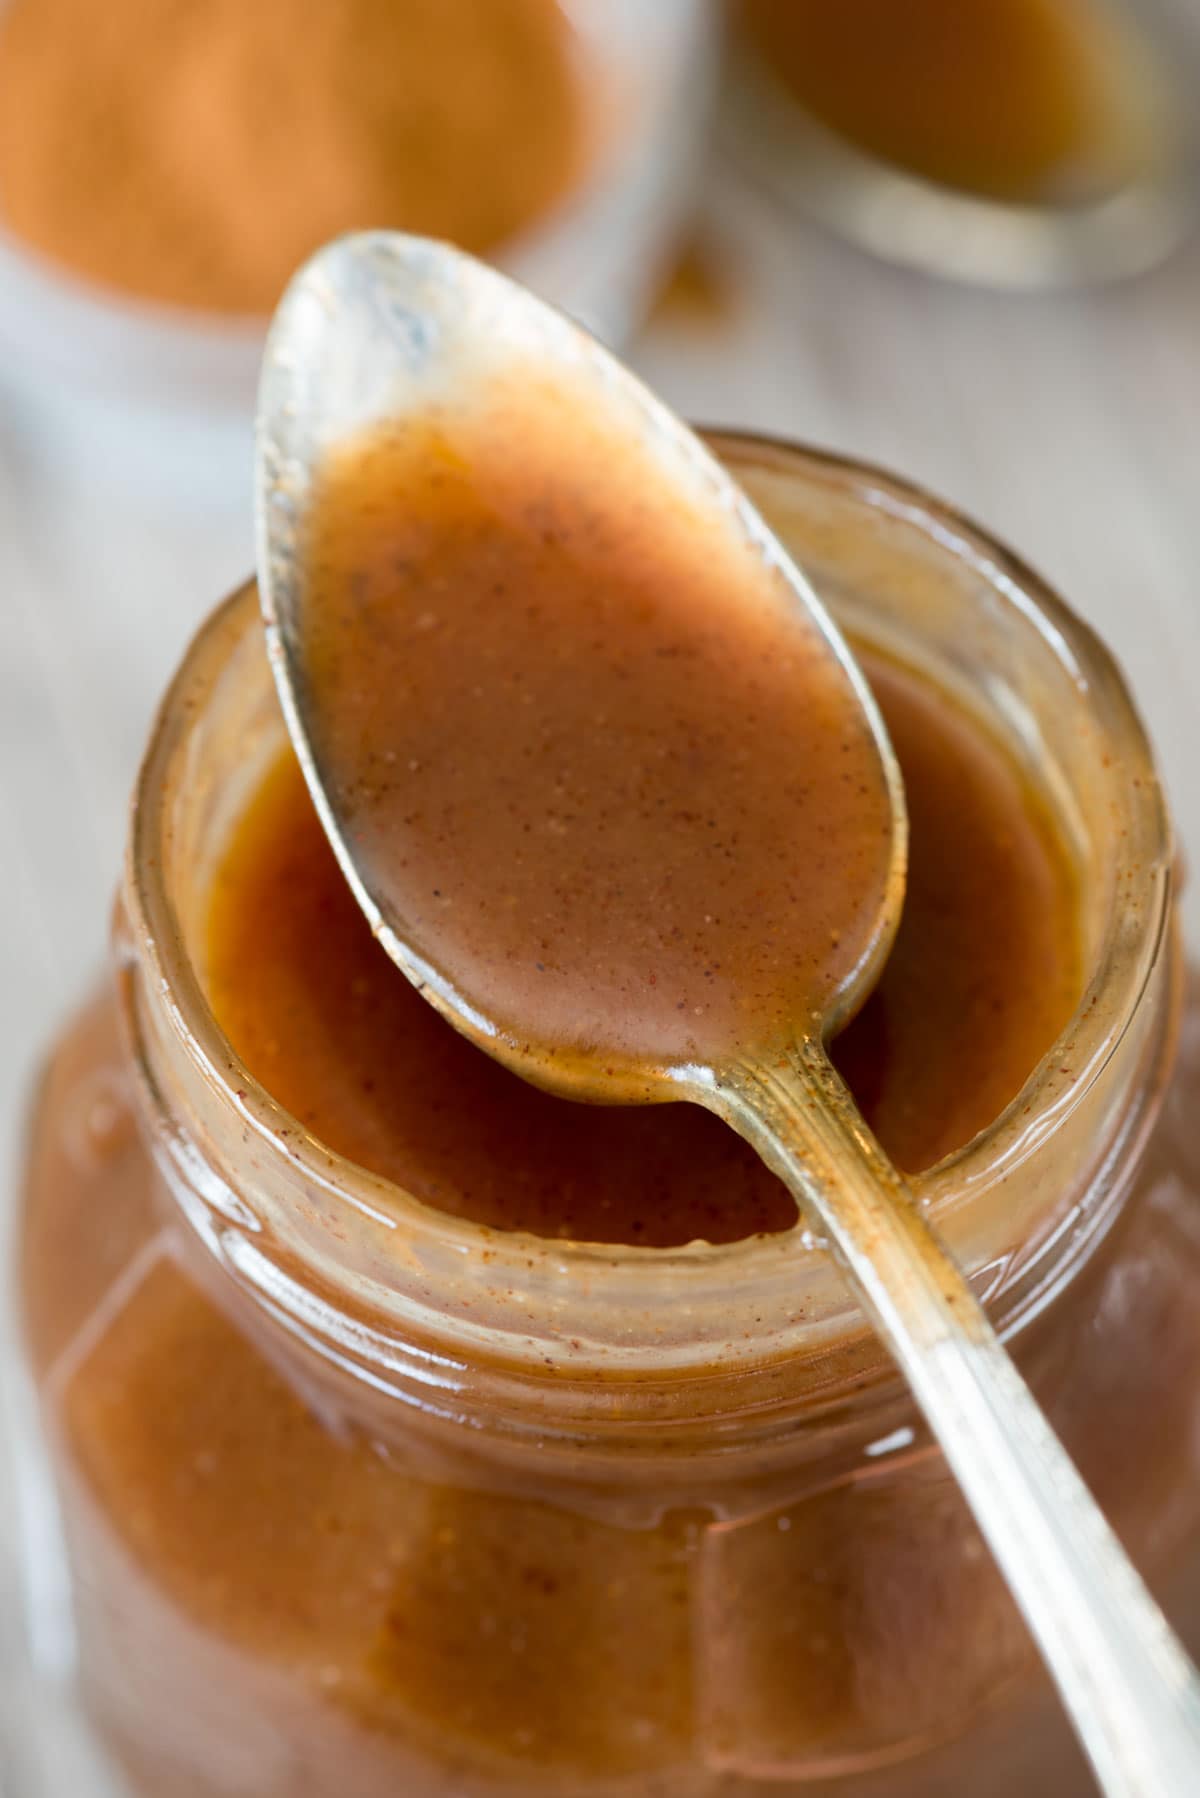 Easy Homemade Cinnamon Caramel Sauce Recipe - this caramel has just 5 ingredients and is so silky smooth and rich with the flavor of cinnamon!